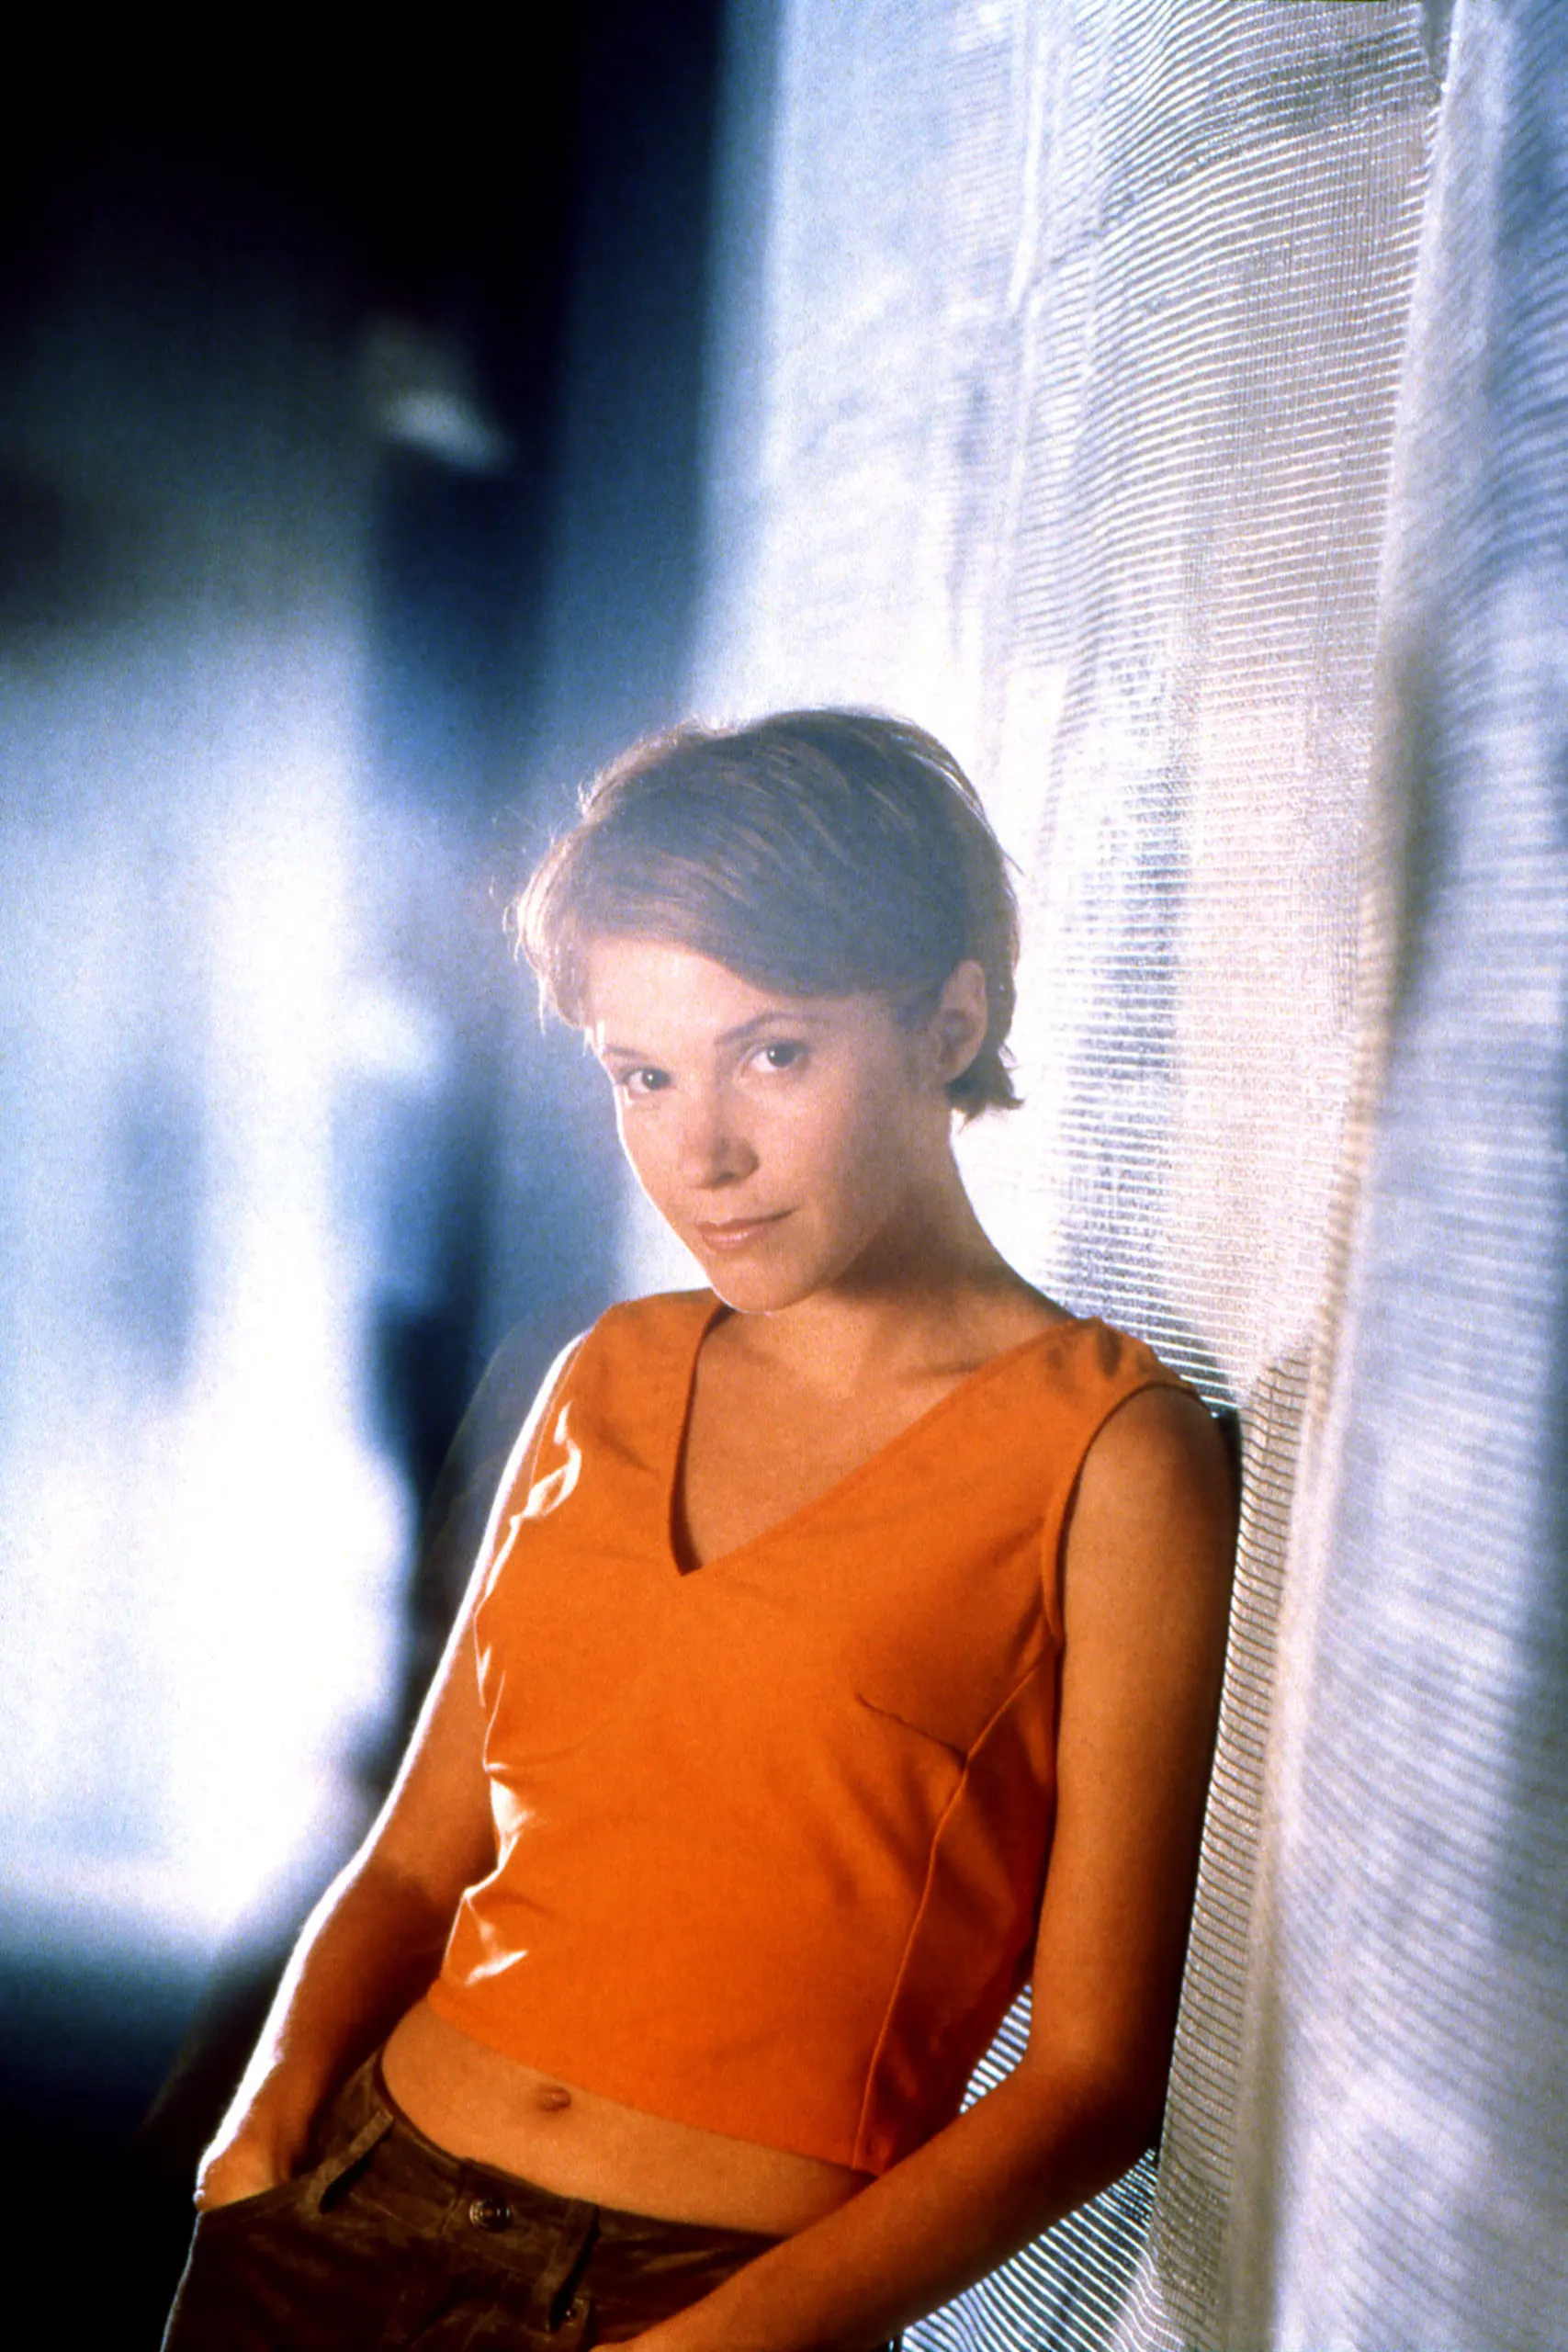 Profile photo of actress Sabrina Lloyd as Wade Welles from the show Sliders